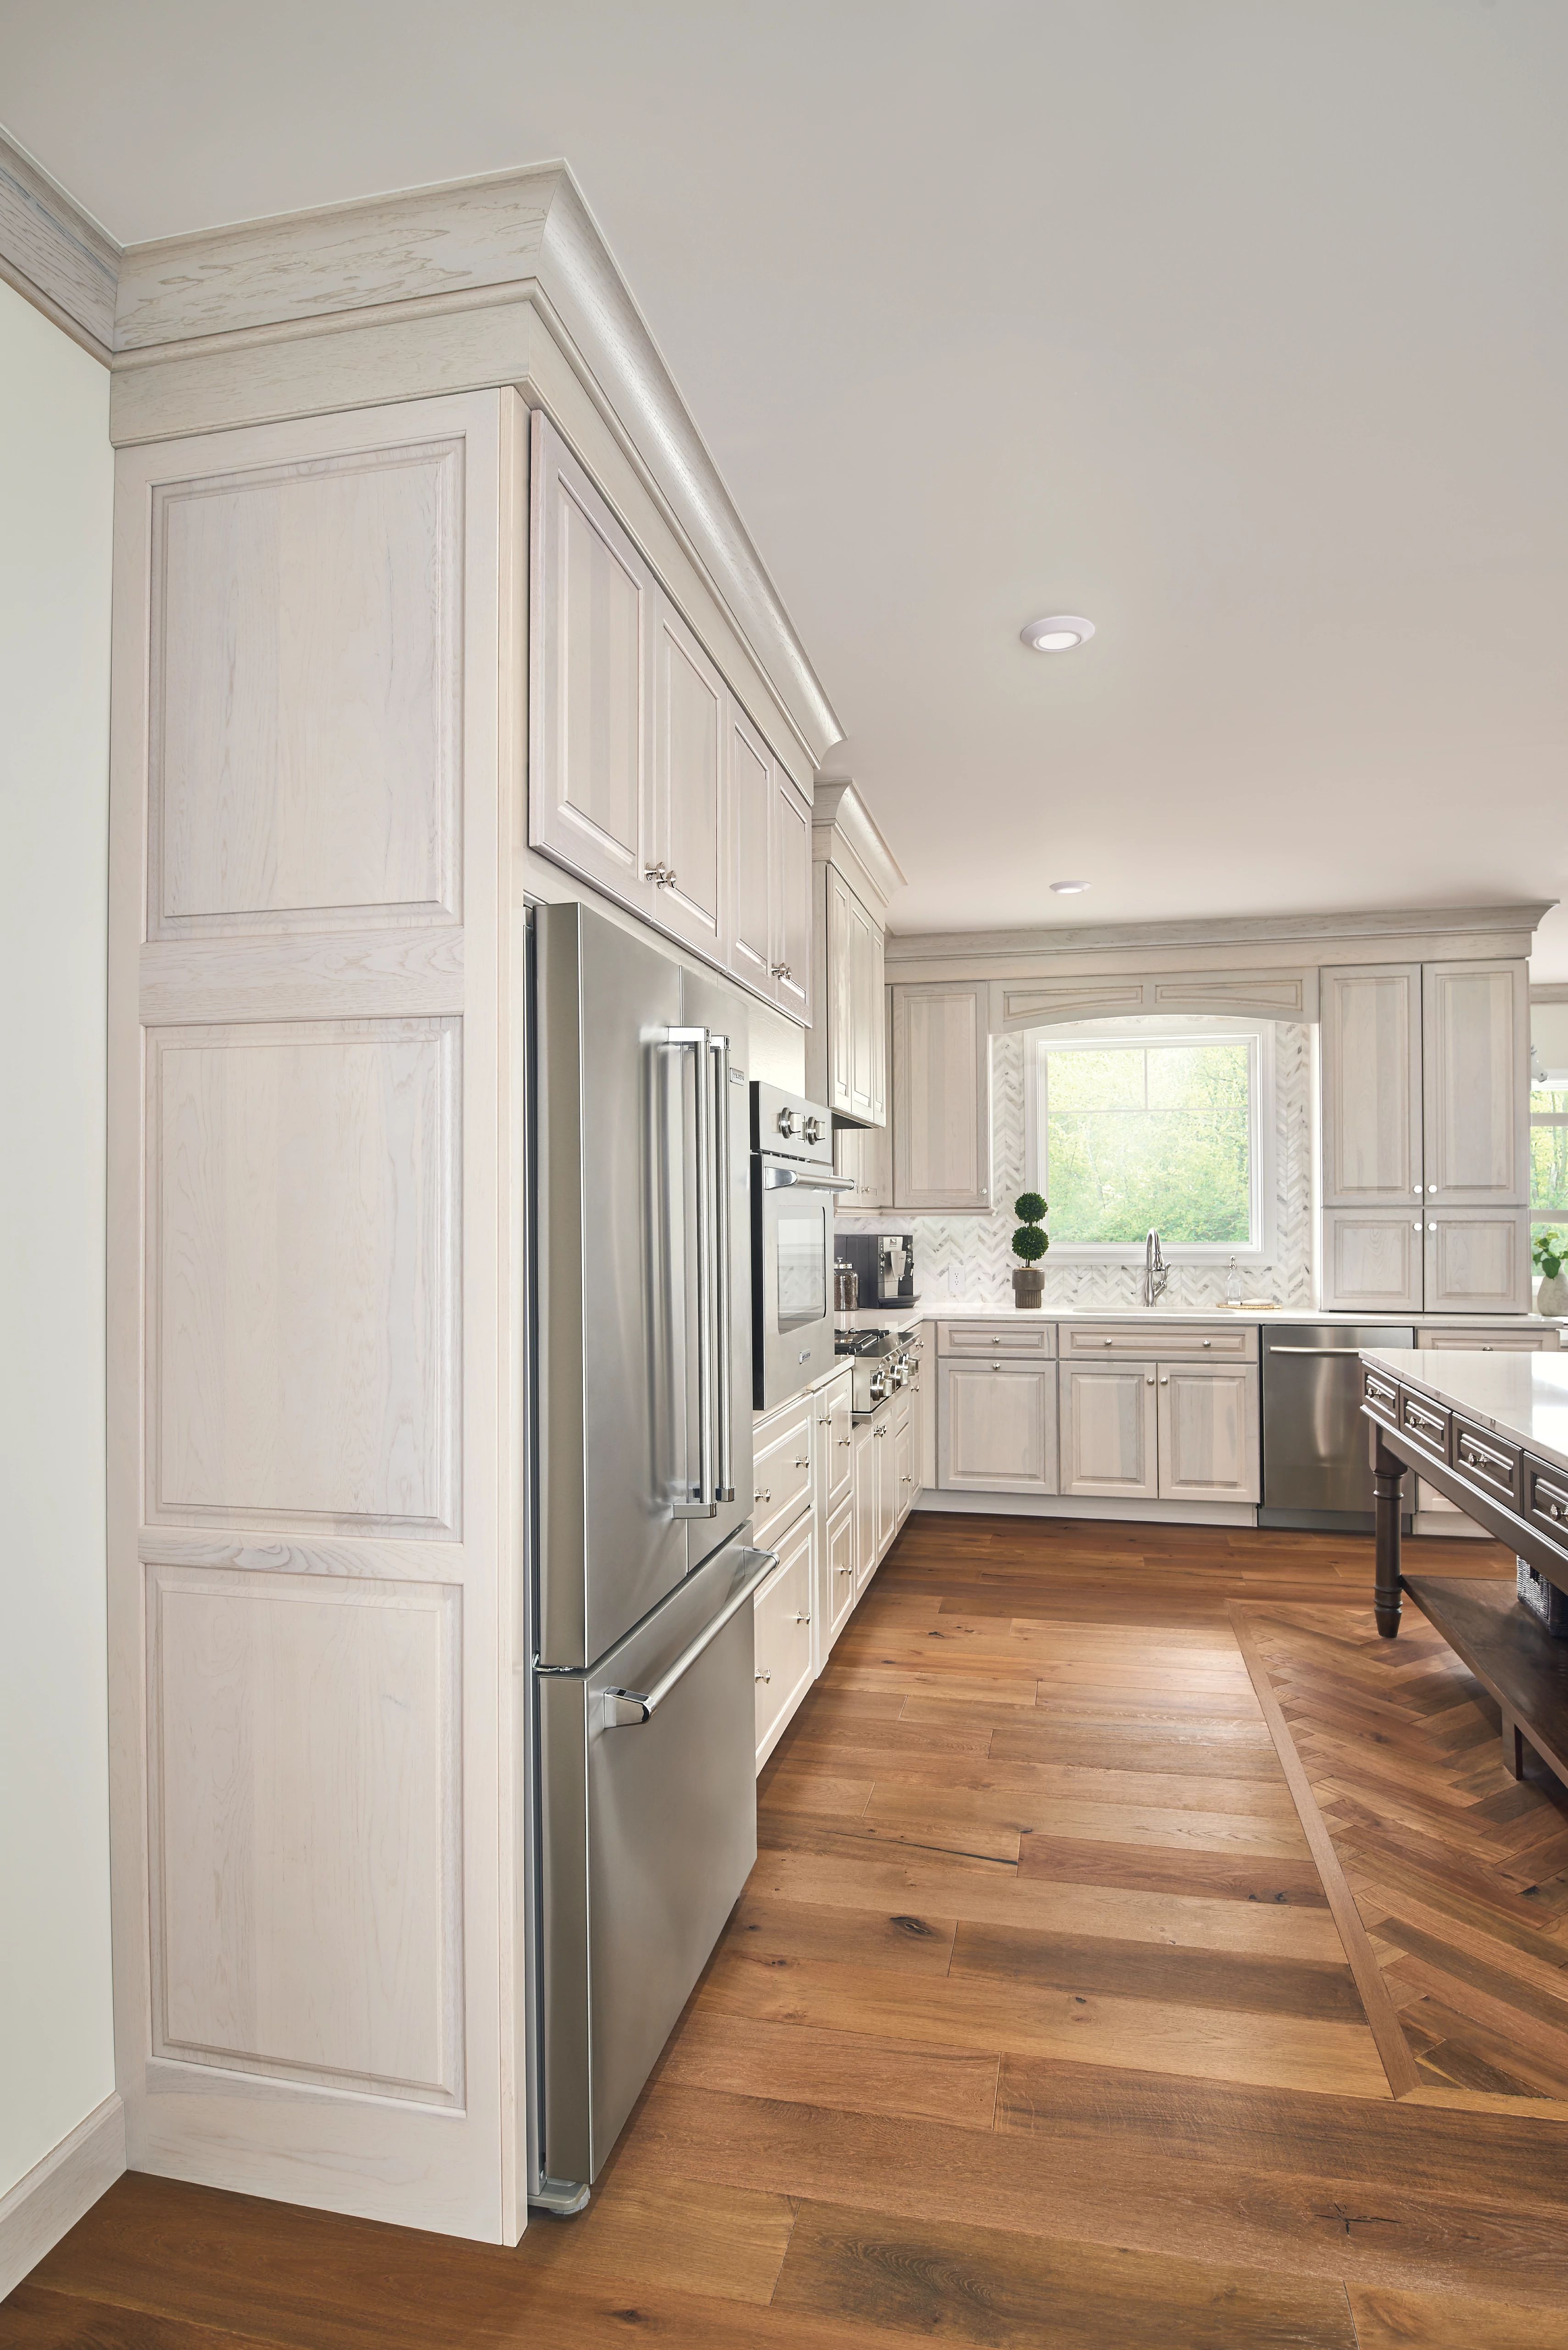 KraftMaid tall end panel used to create a built-in refrigerator look in a traditional kitchen